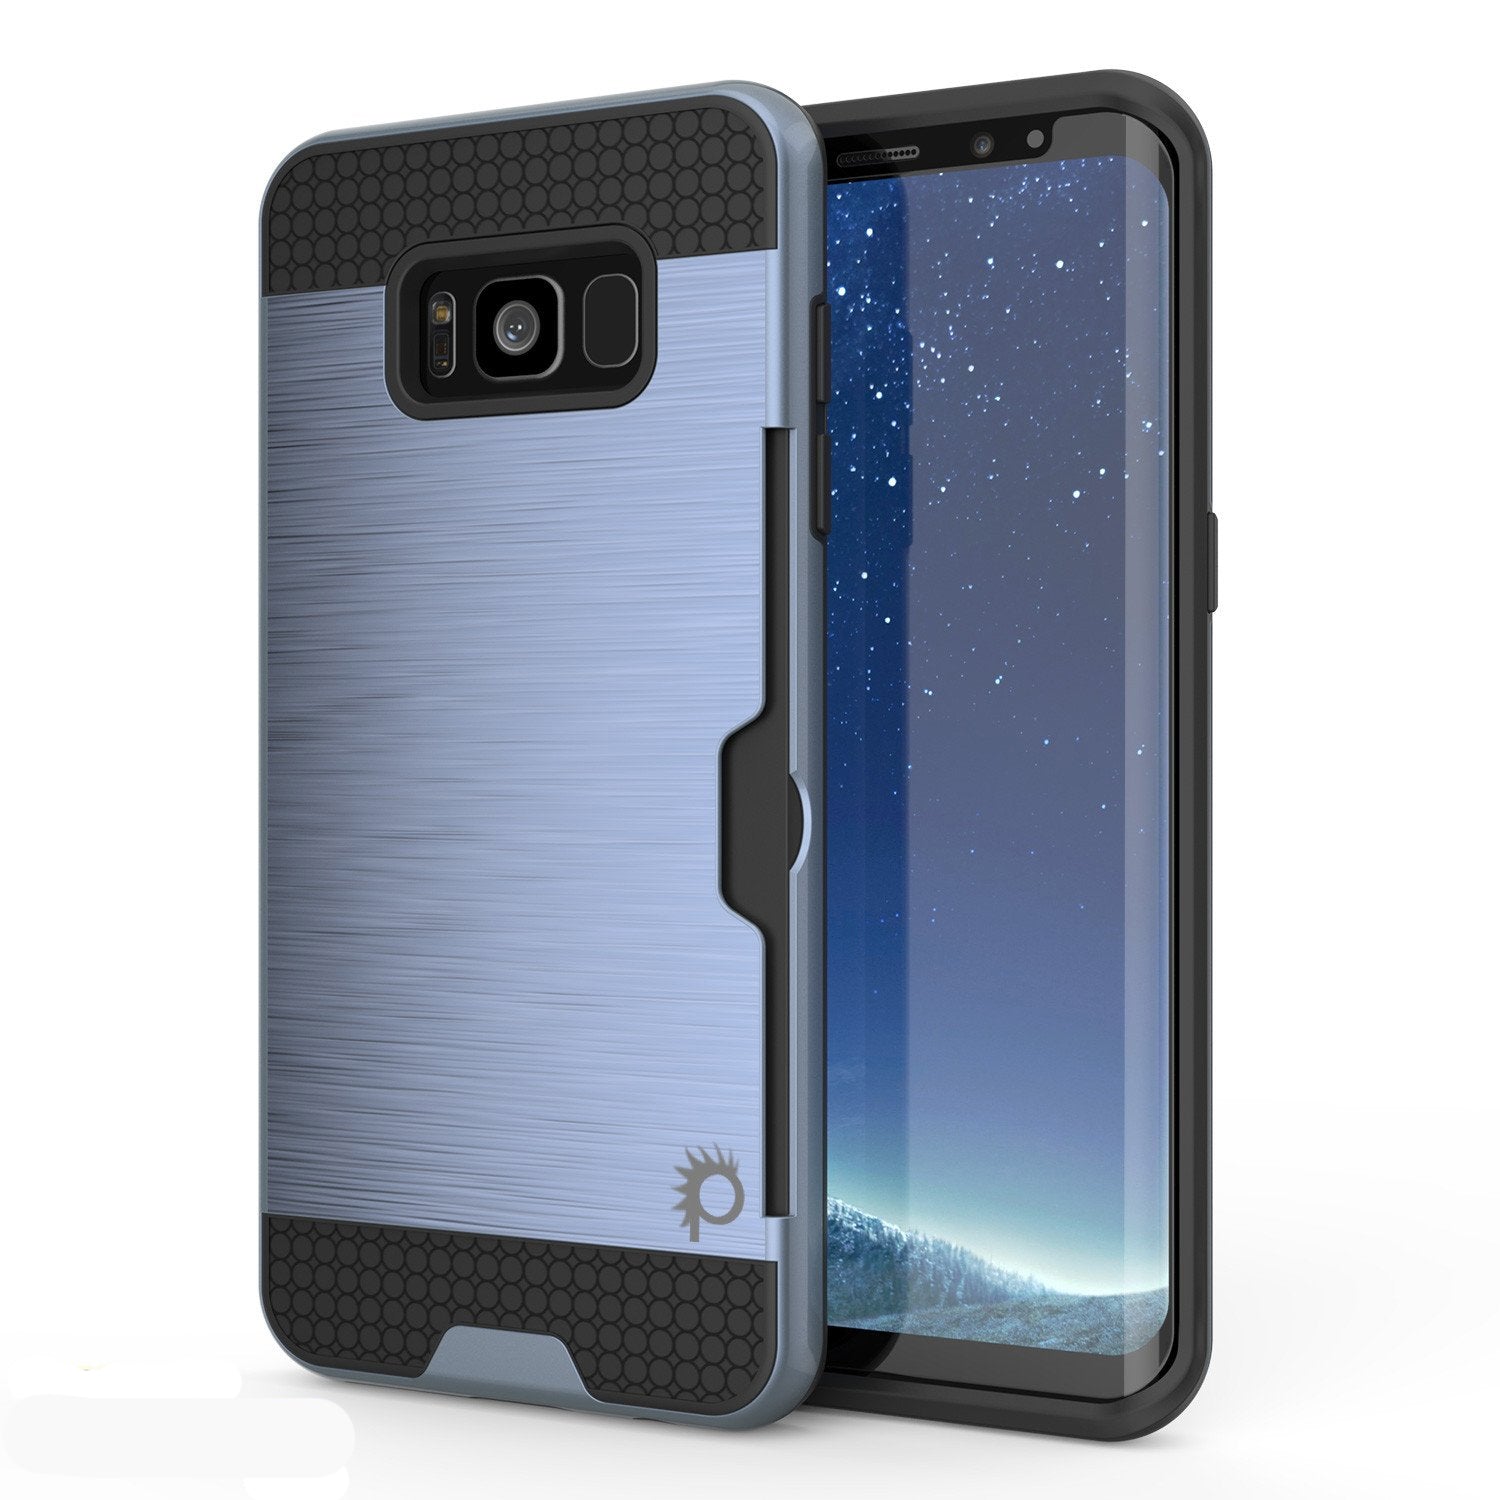 Galaxy S8 Plus Case, PUNKcase [SLOT Series] [Slim Fit] Dual-Layer Armor Cover w/Integrated Anti-Shock System, Credit Card Slot [Navy] (Color in image: Navy)